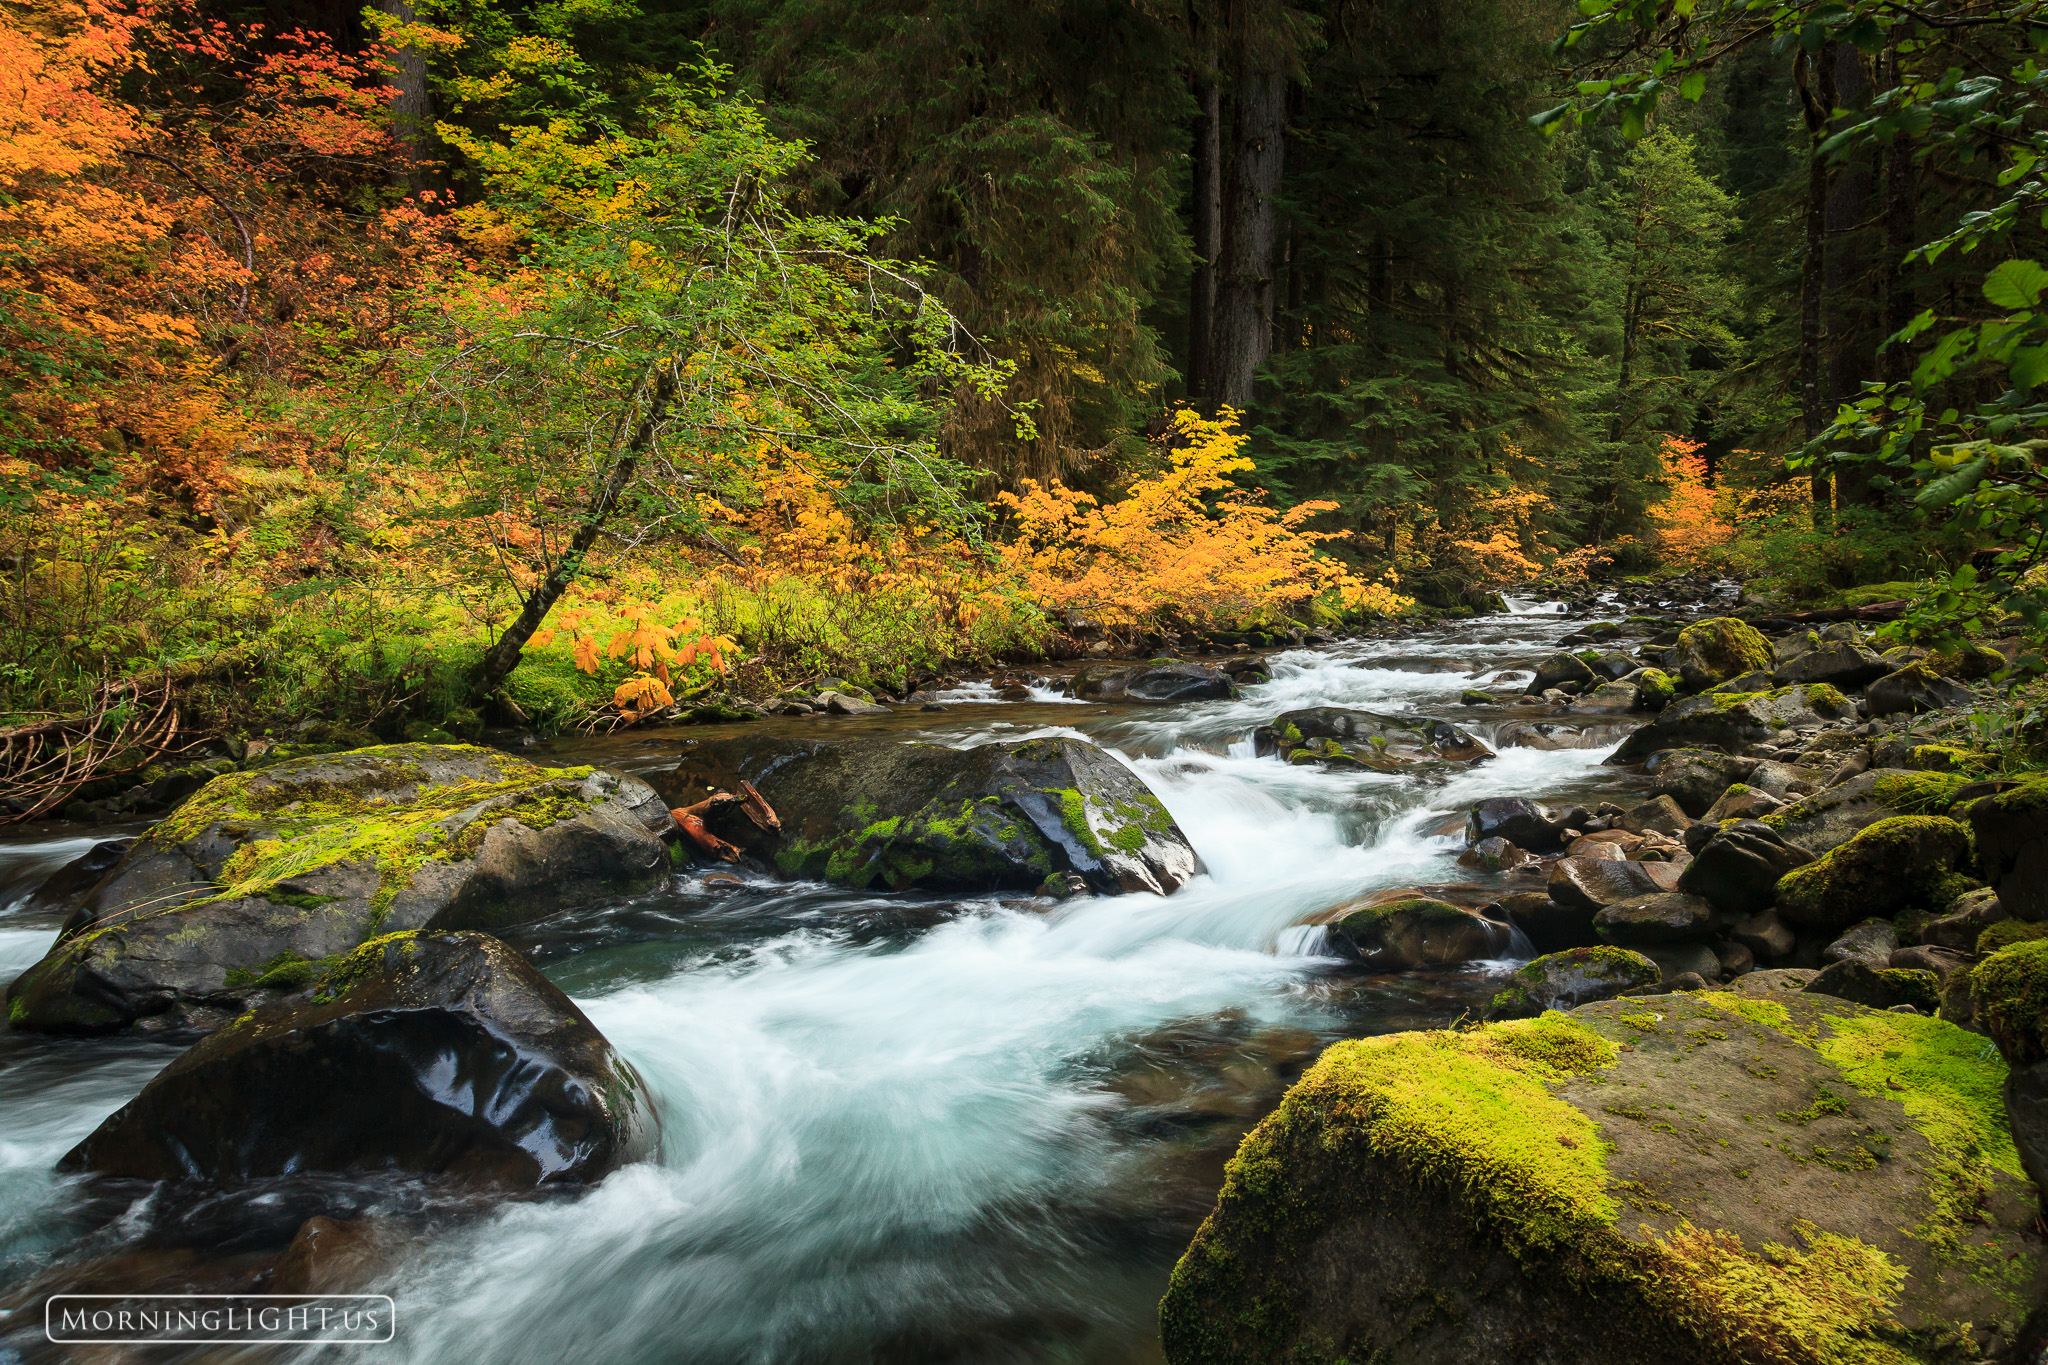 The Sol Duc river winds its way through mossy bolders and beautiful fall folliage on this warm October morning.